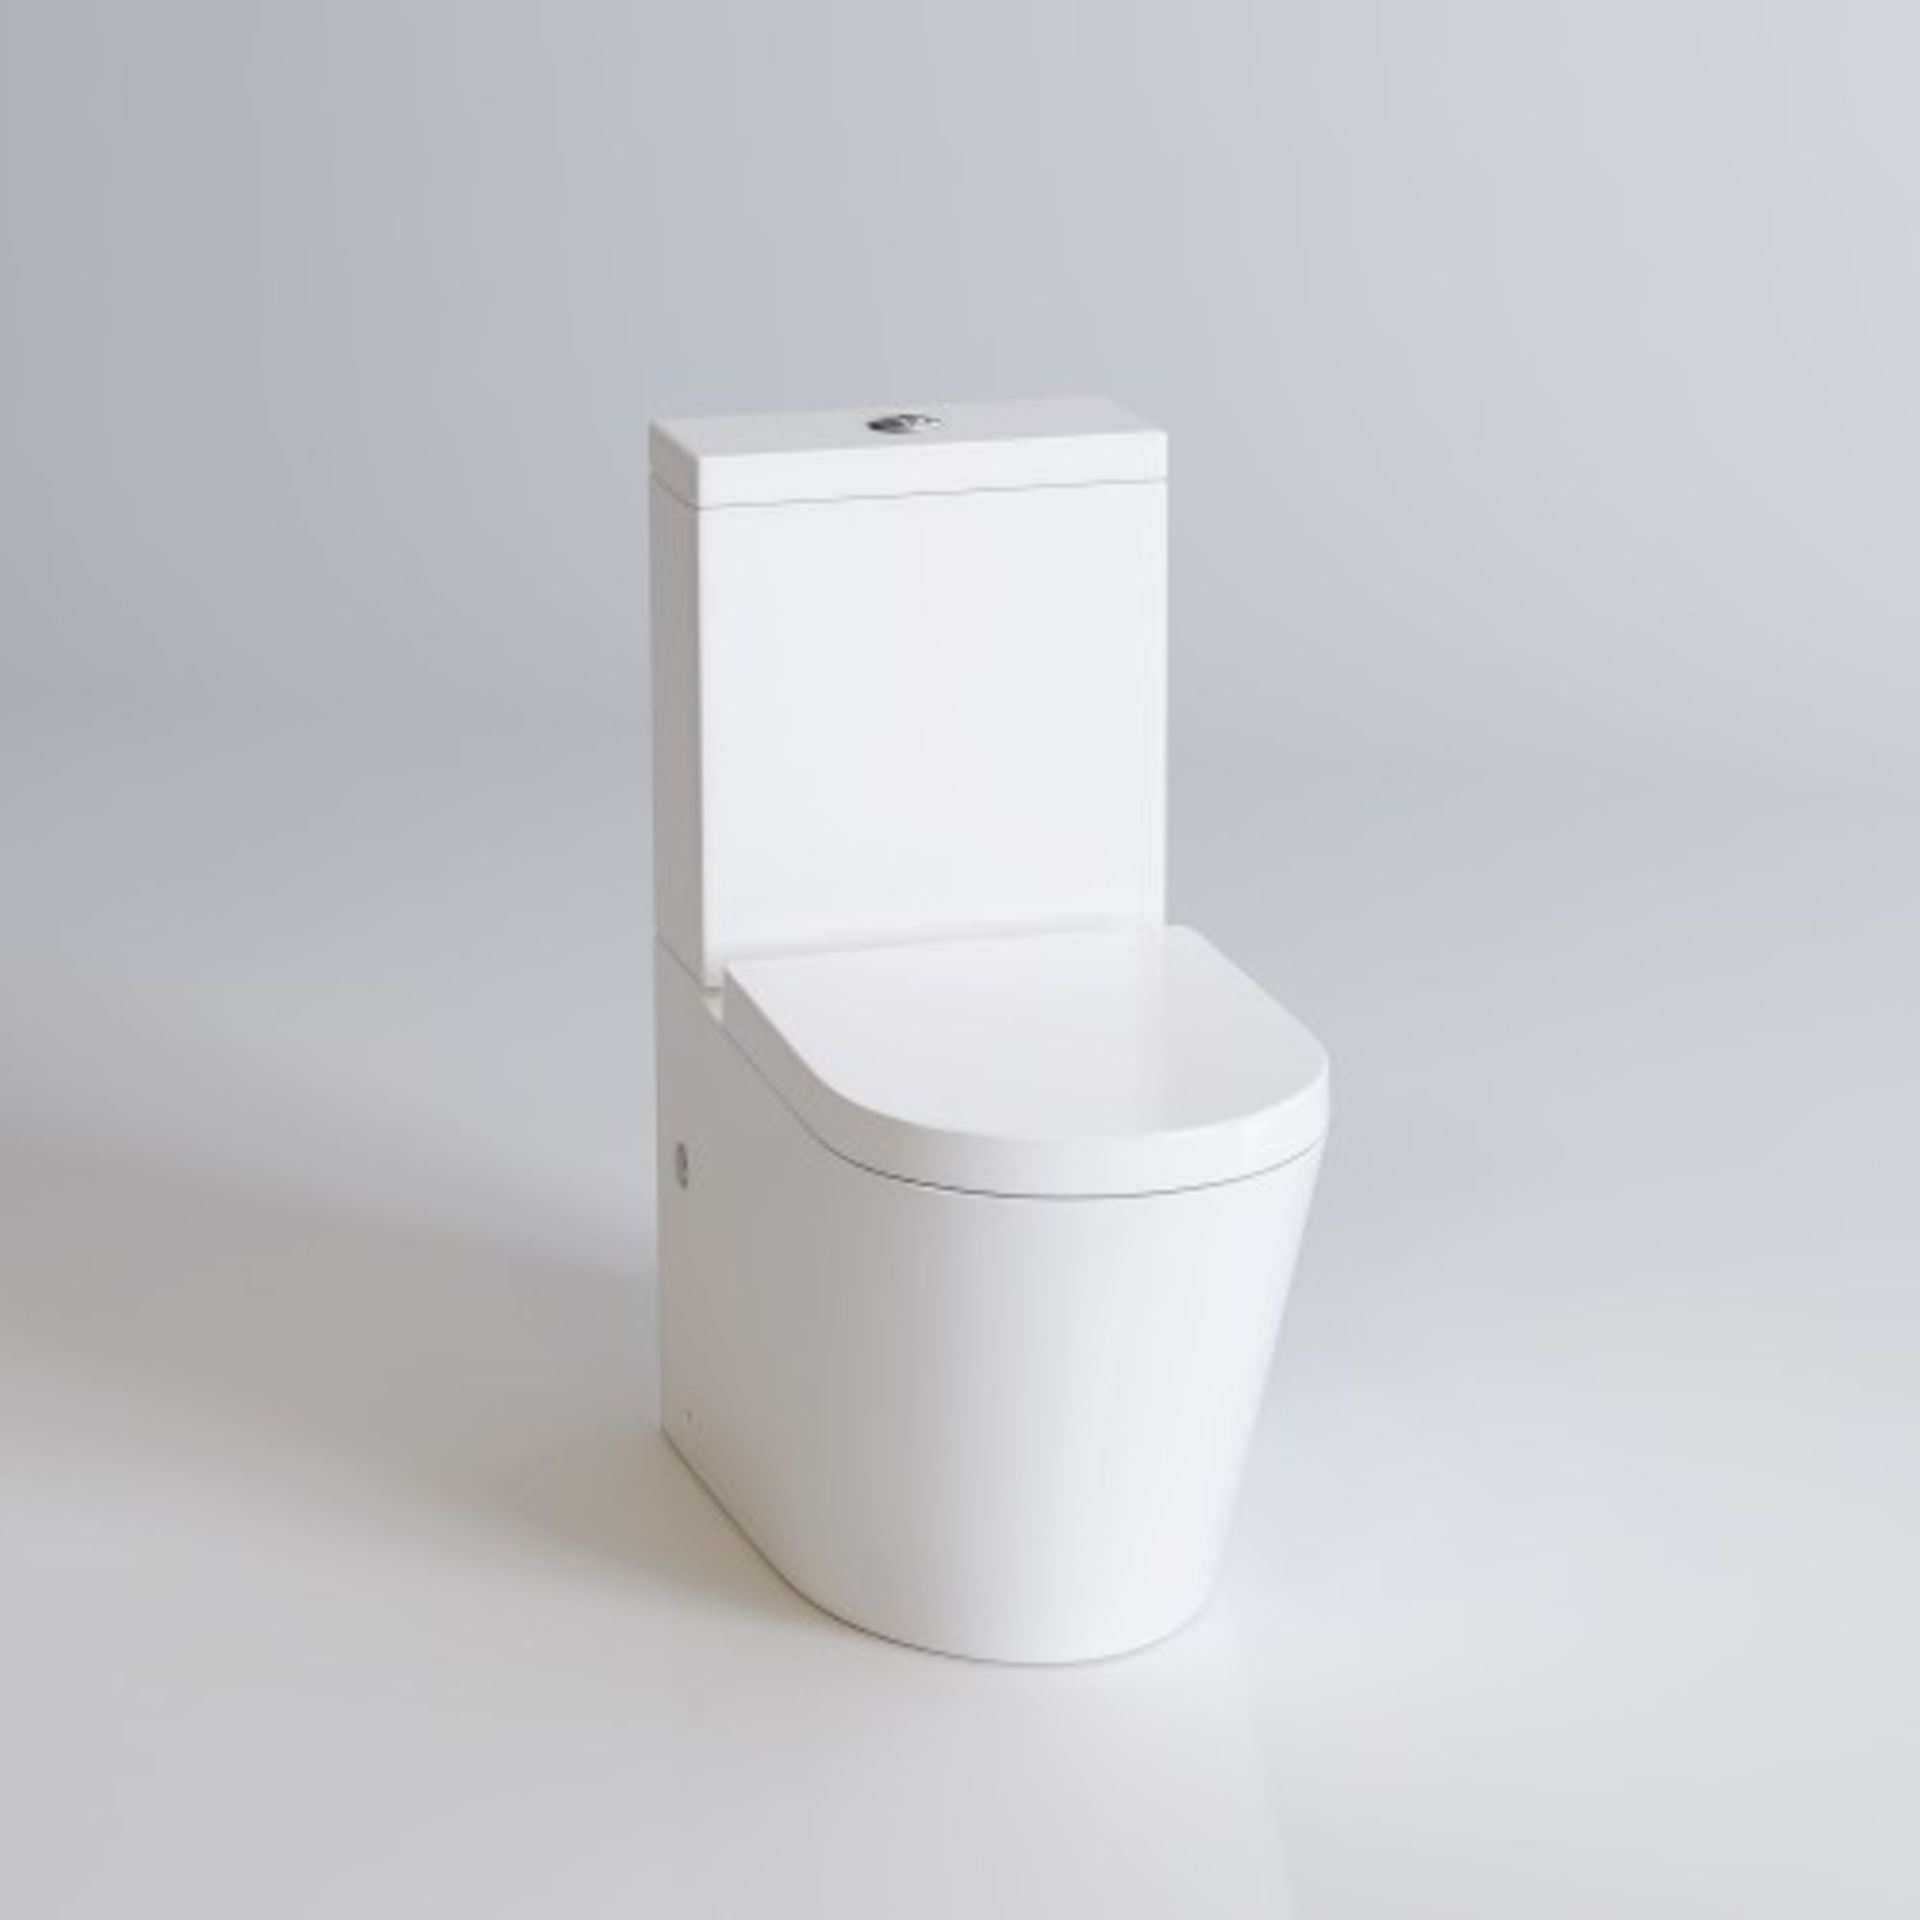 New Lyon Ii Close Coupled Toilet & Cistern Inc Luxury Soft Close Seat. RRP £599.99.Lyon Is A ... - Image 2 of 2